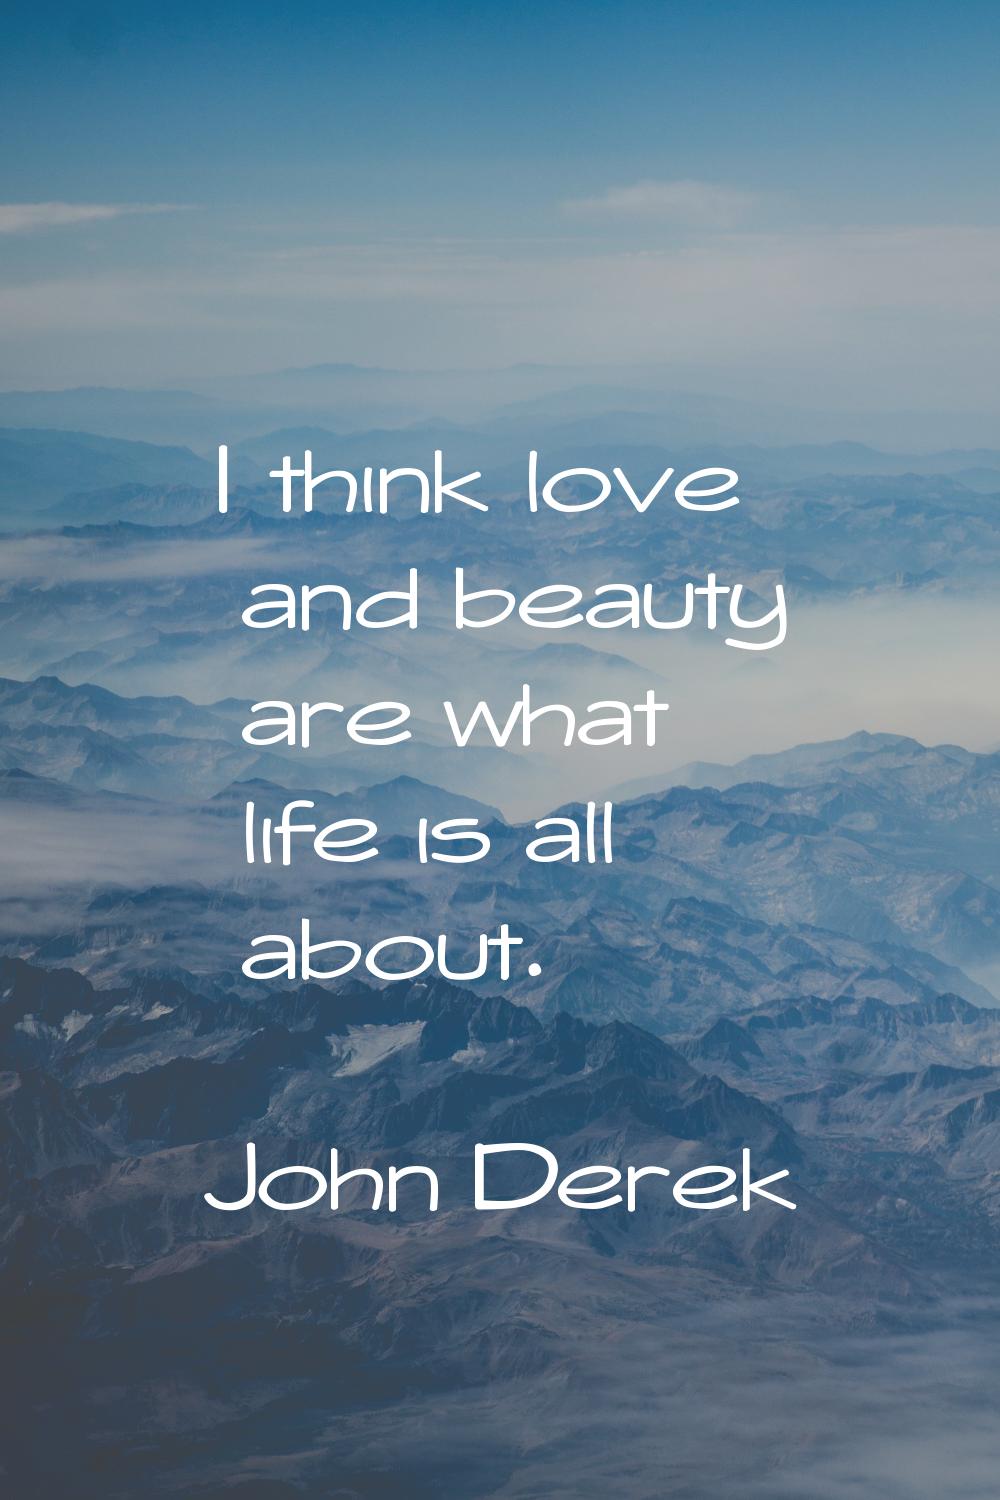 I think love and beauty are what life is all about.